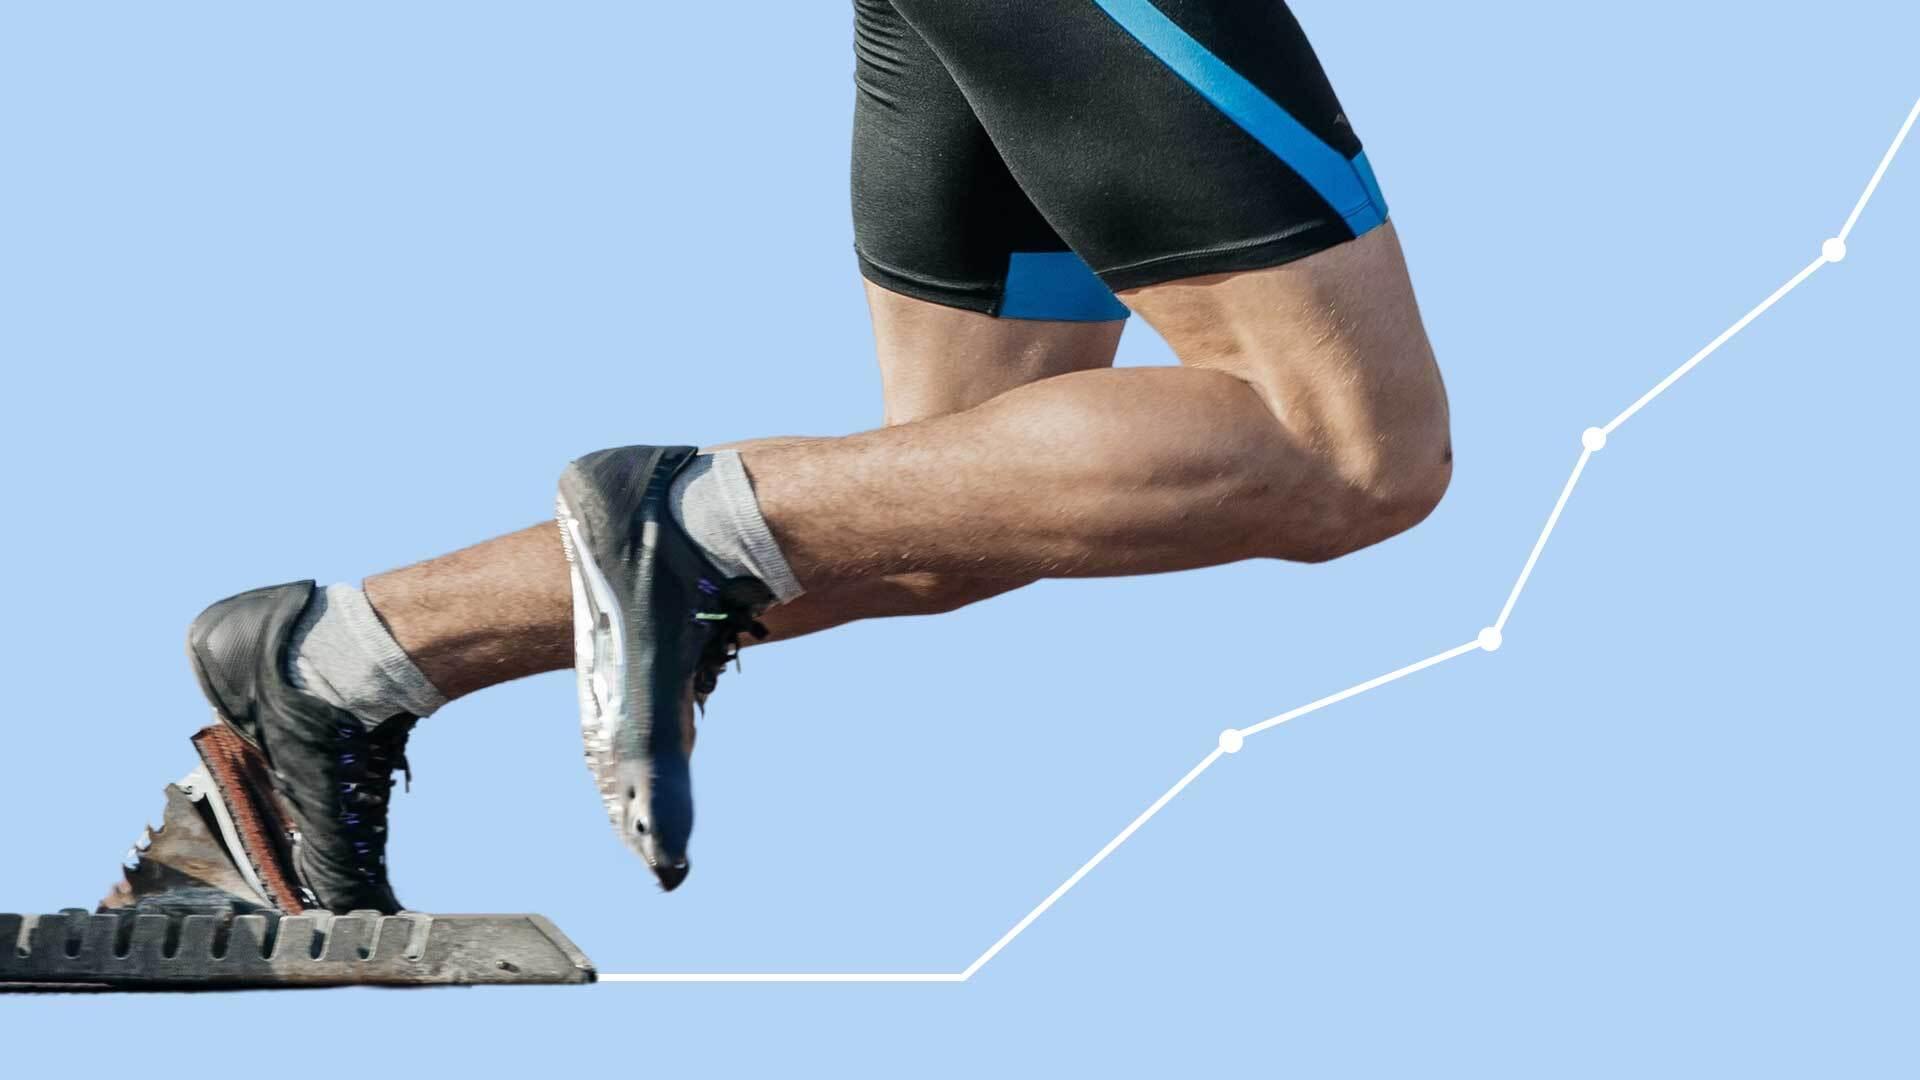 Graphic shows the legs of a runner charging off a starting block that's connected to a line chart.